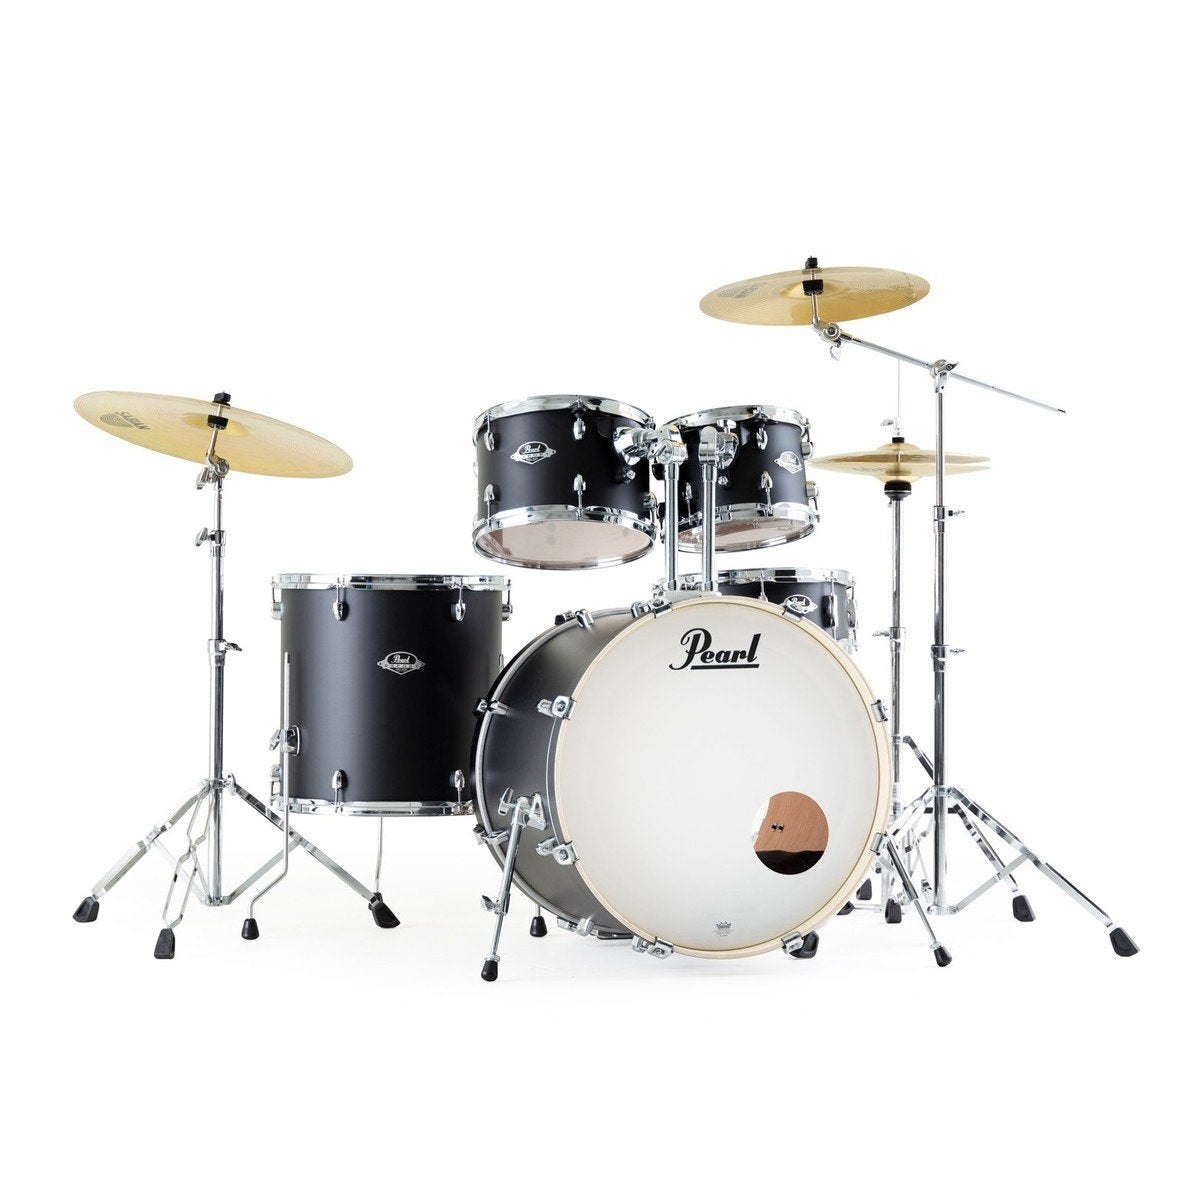 Pearl EXX725PC761 Export Series 5-Piece Drum Shell Pack-Satin Shadow Black-Music World Academy